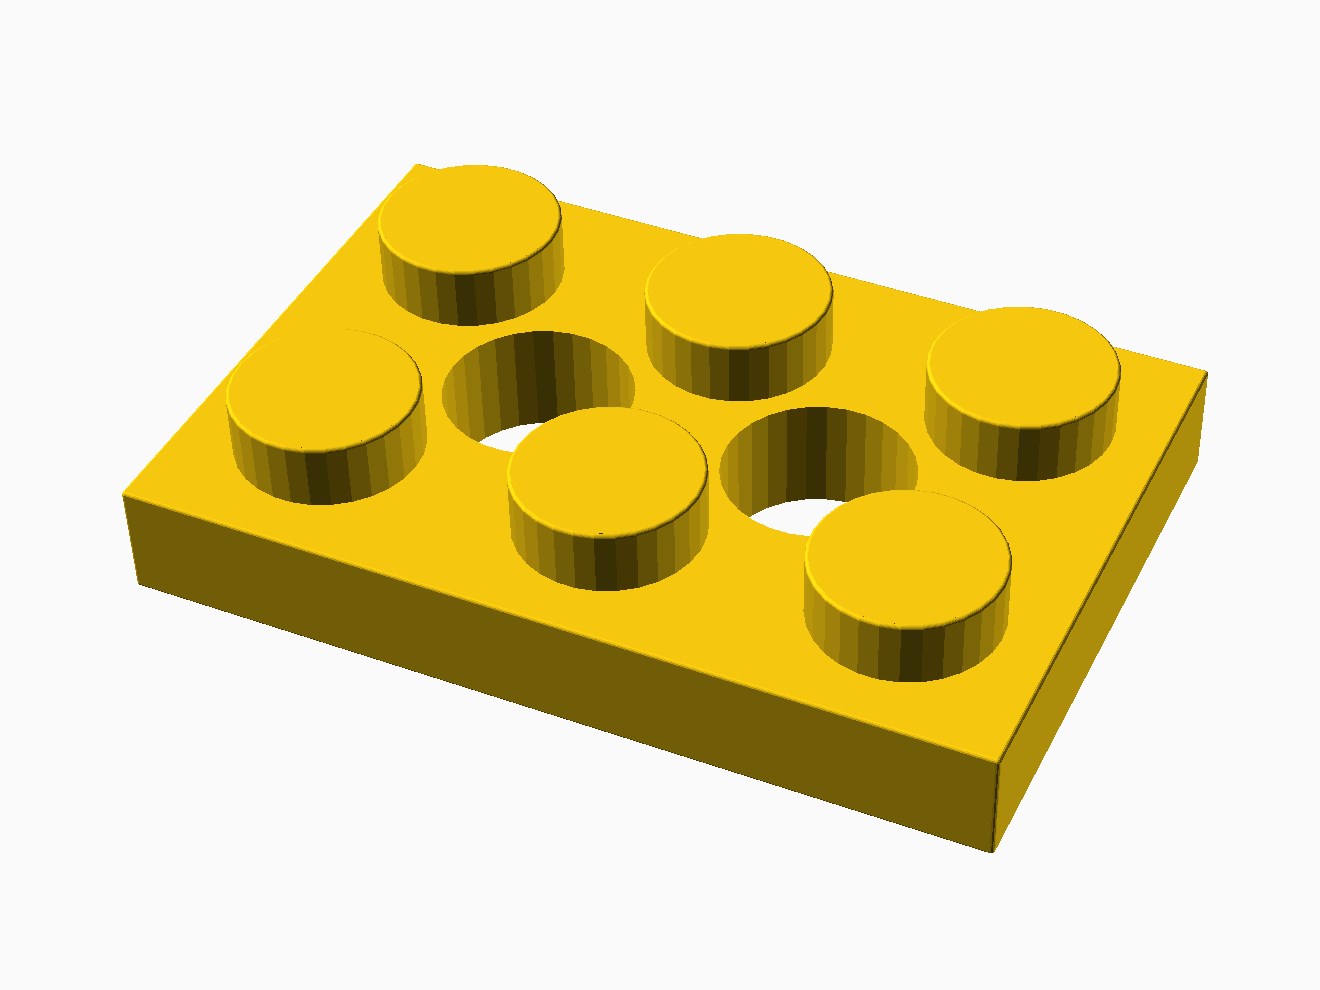 3D printable model of a LEGO Technic 3x2 Plate.